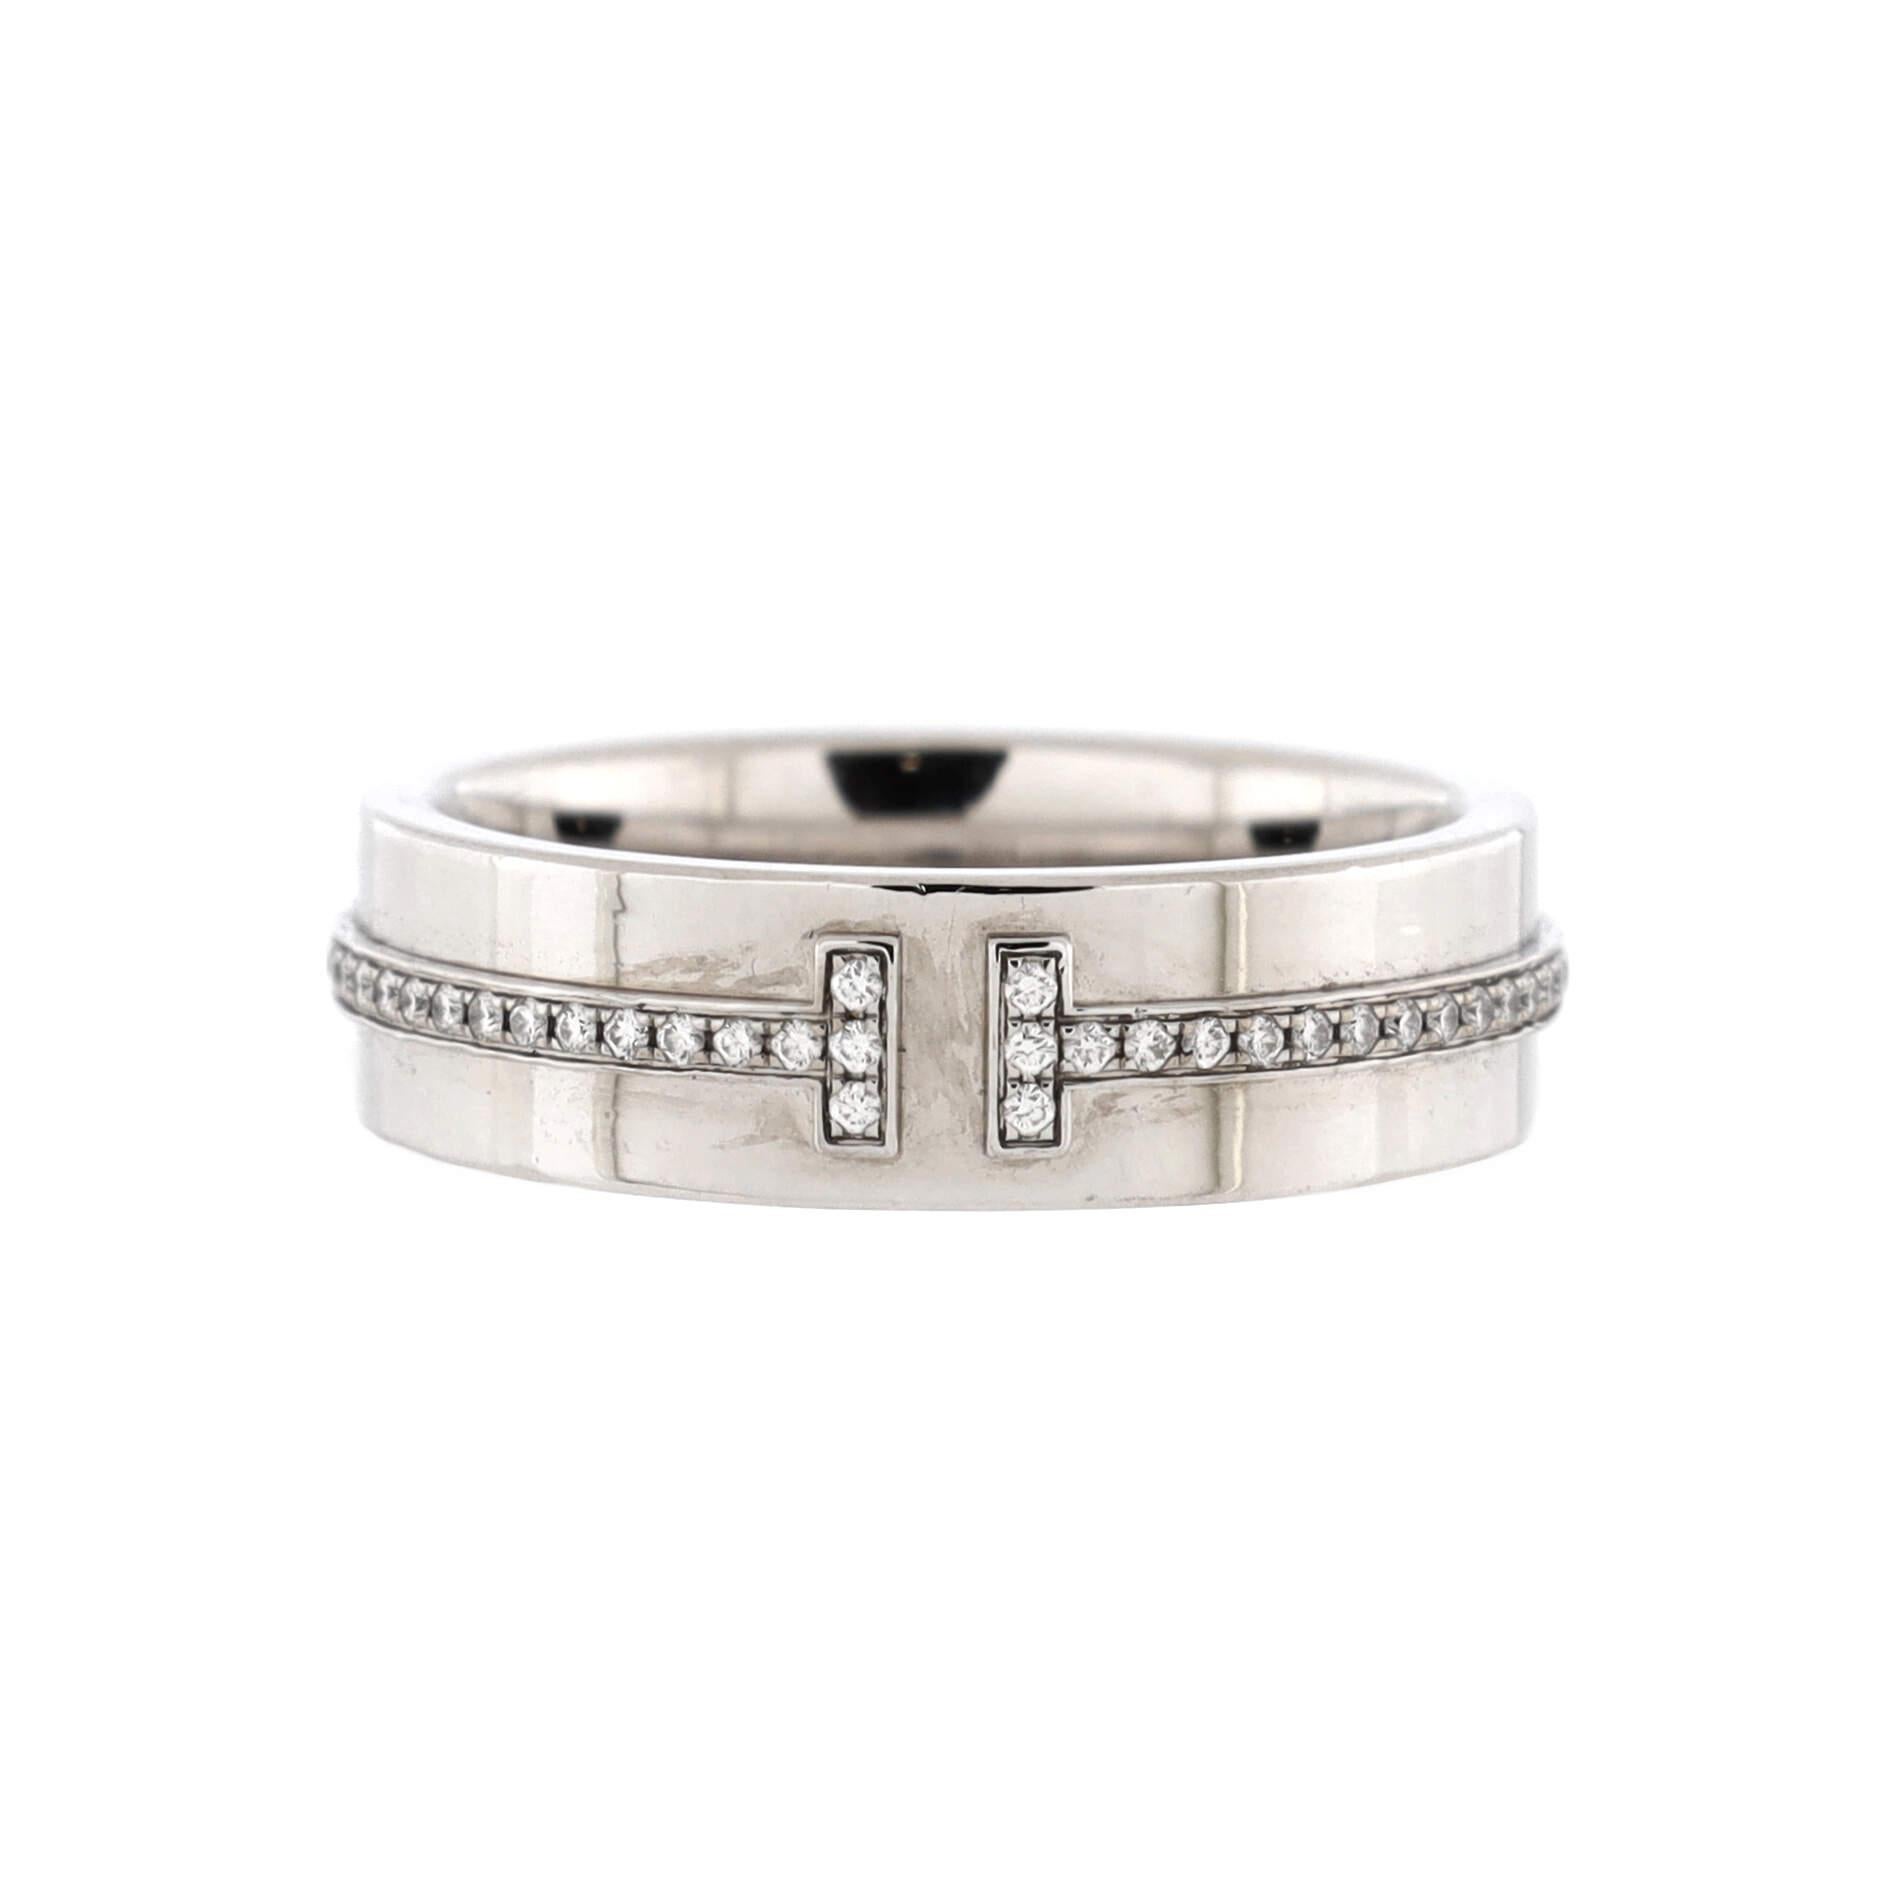 Condition: Great. Minor wear throughout.
Accessories: No Accessories
Measurements: Size: 9, Width: 5.3 mm
Designer: Tiffany & Co.
Model: T Two Ring 18K White Gold and Diamonds Wide
Exterior Color: White Gold
Item Number: 206772/26